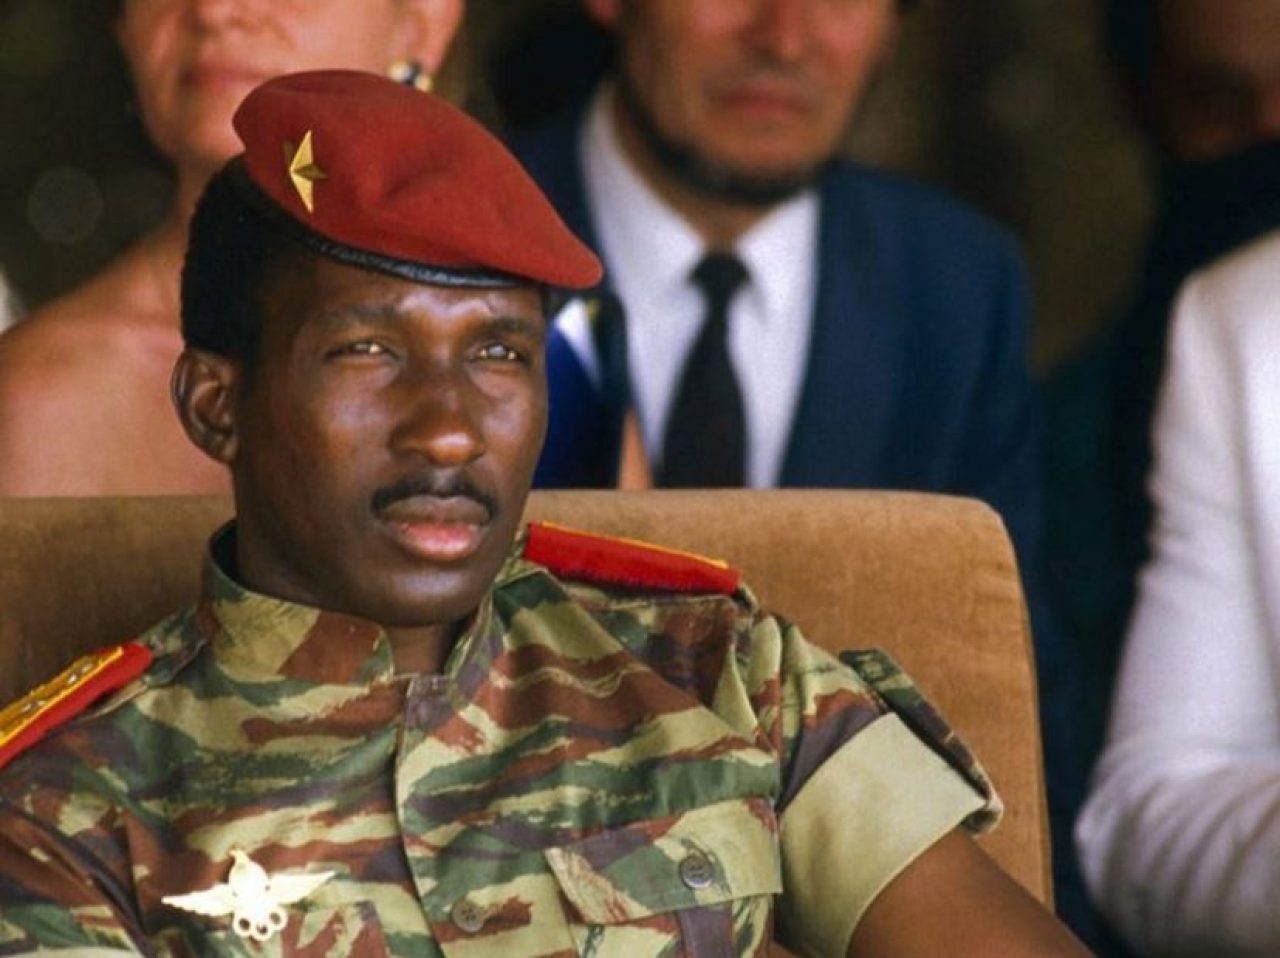 "If the Boulevard had been named after imperialists, today we have heroes after whom we can name these Boulevards" - Junta names Boulevard after Thomas Sankara. Afro News Wire